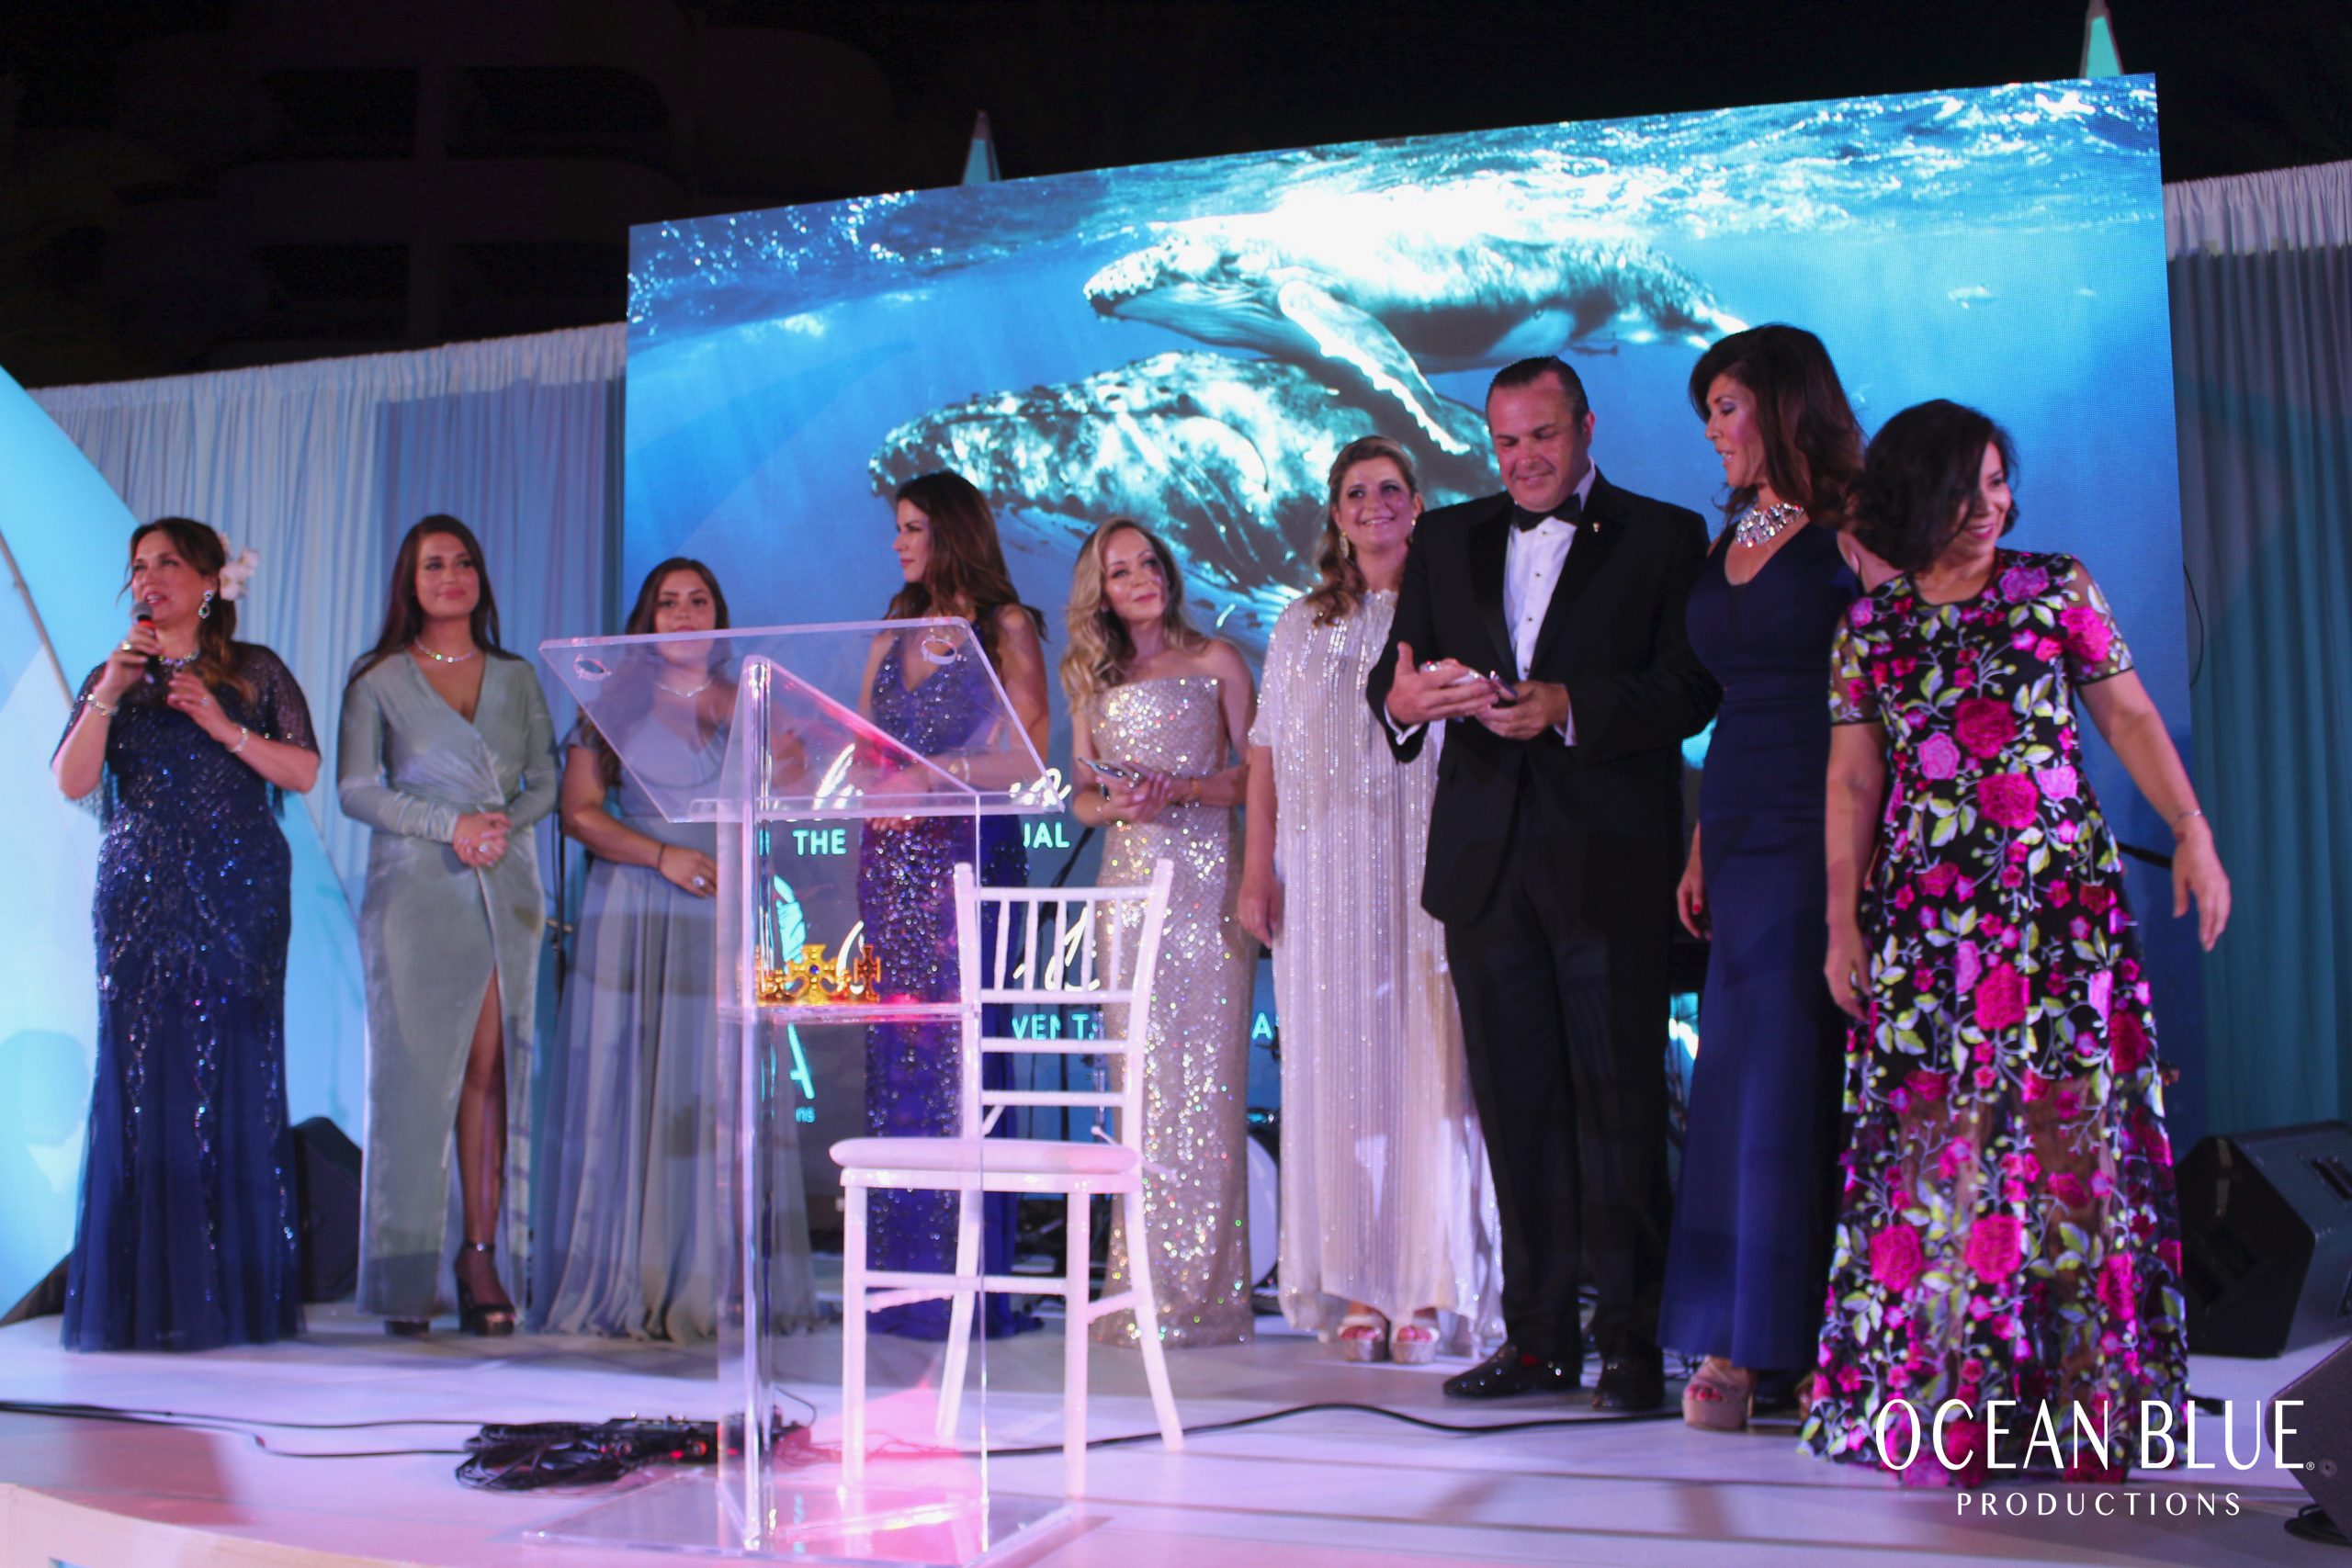 Behind The Brand. Cabo’s Most Exclusive Luxury Platform Creates Impact with Philanthropic Giving